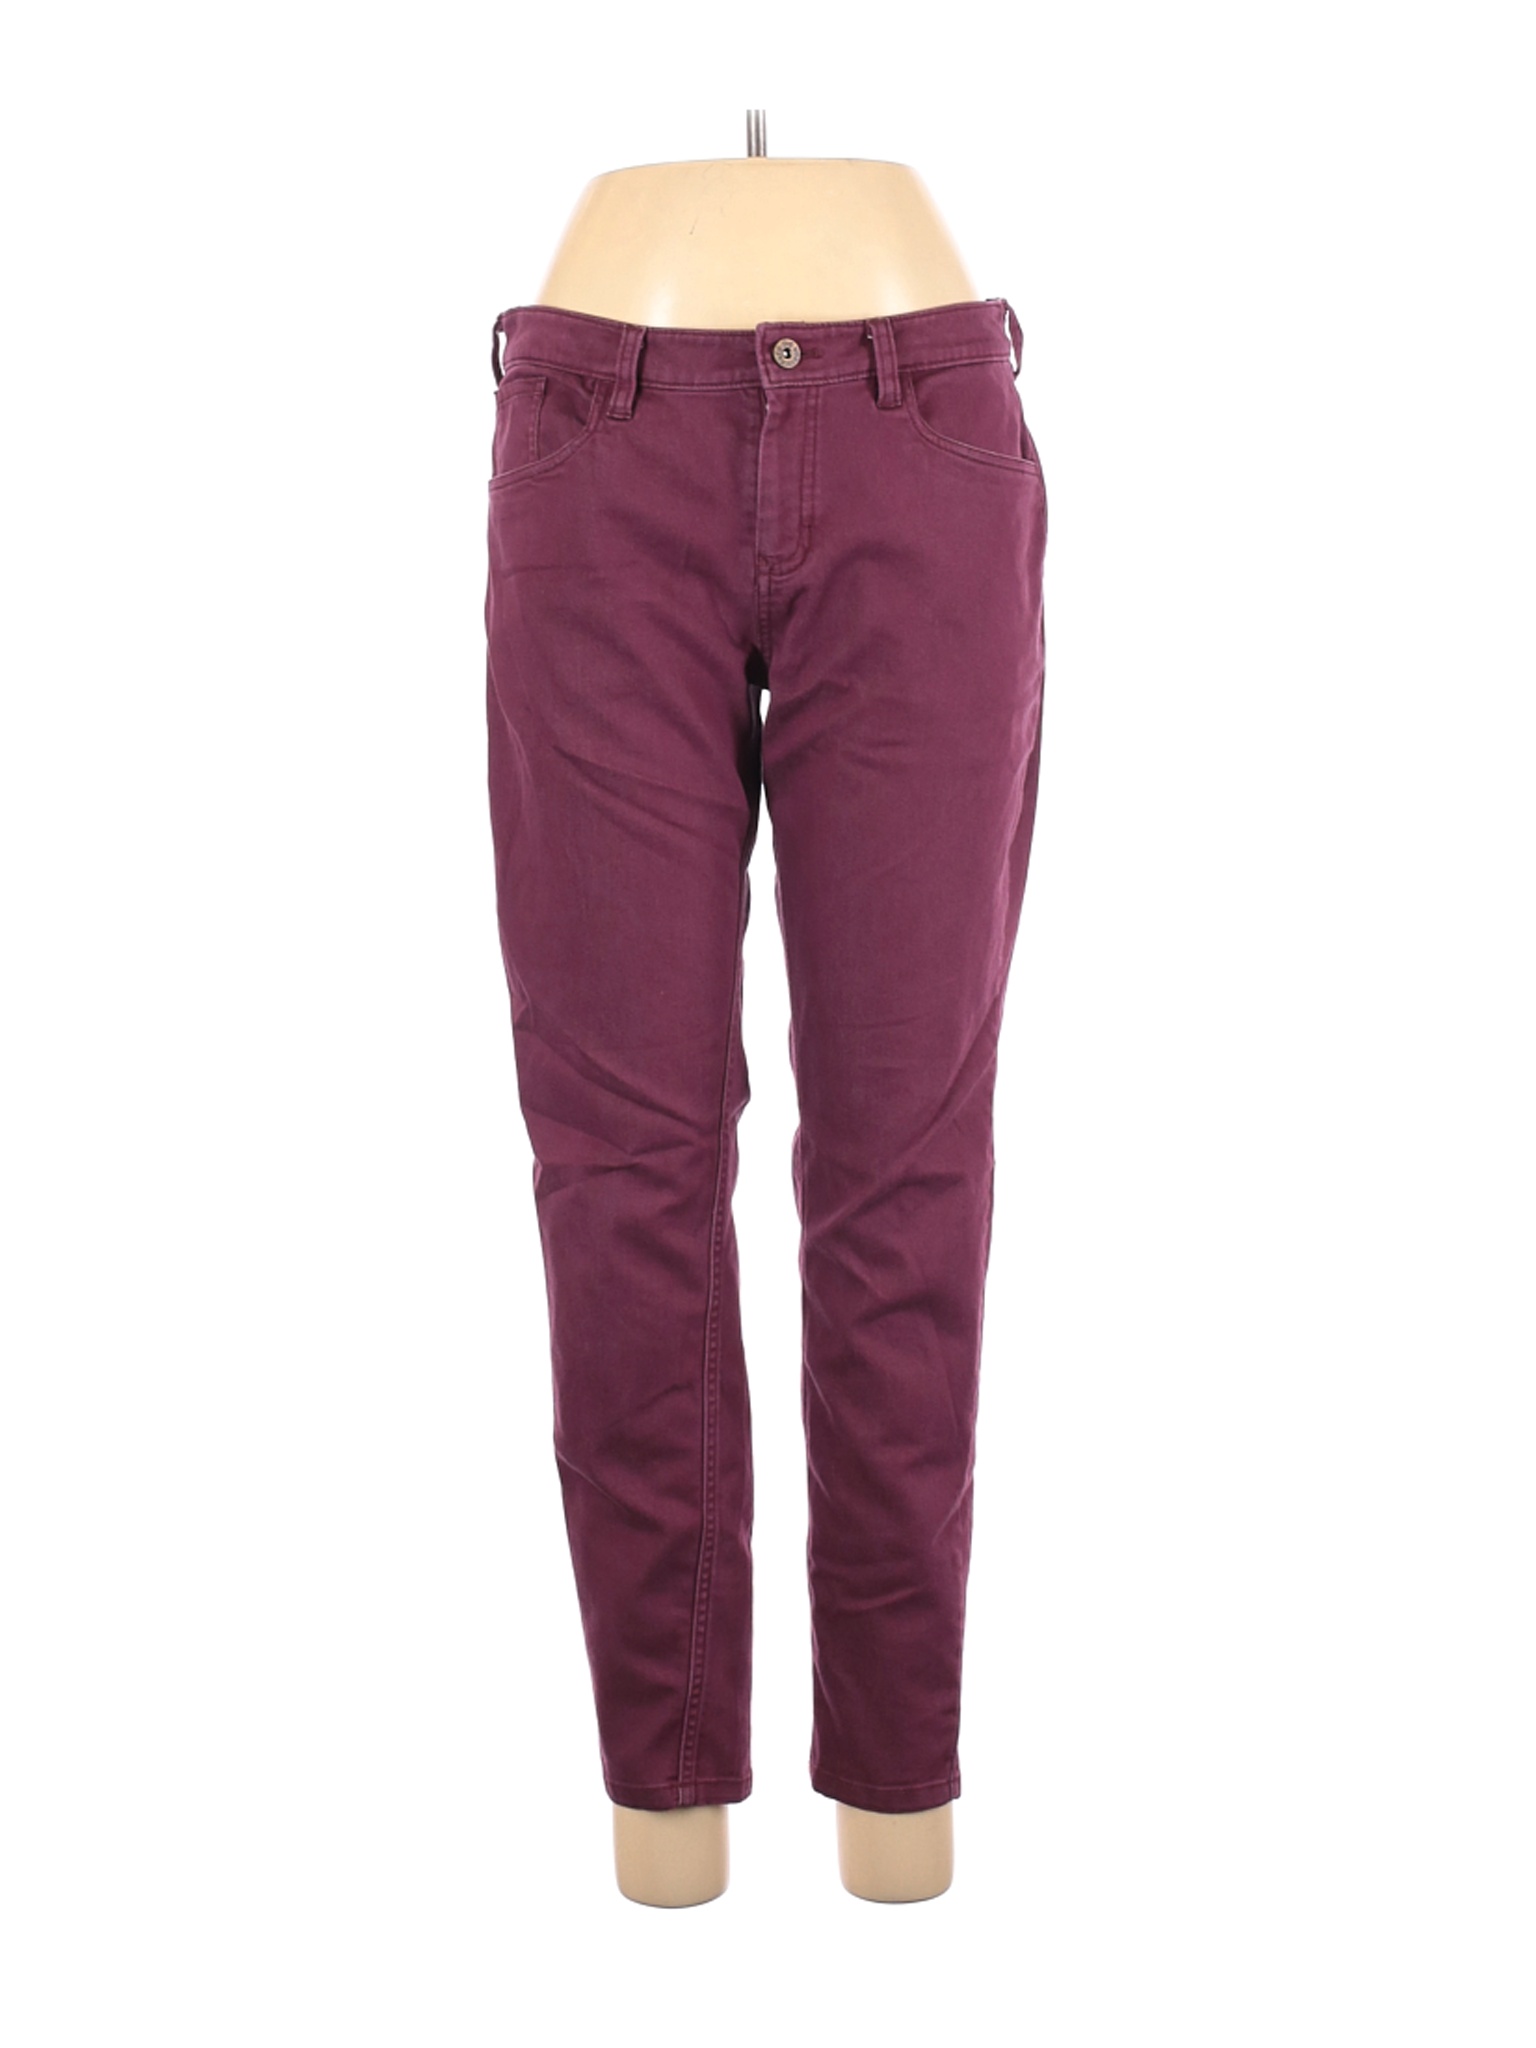 The North Face Women Pink Jeans 8 | eBay